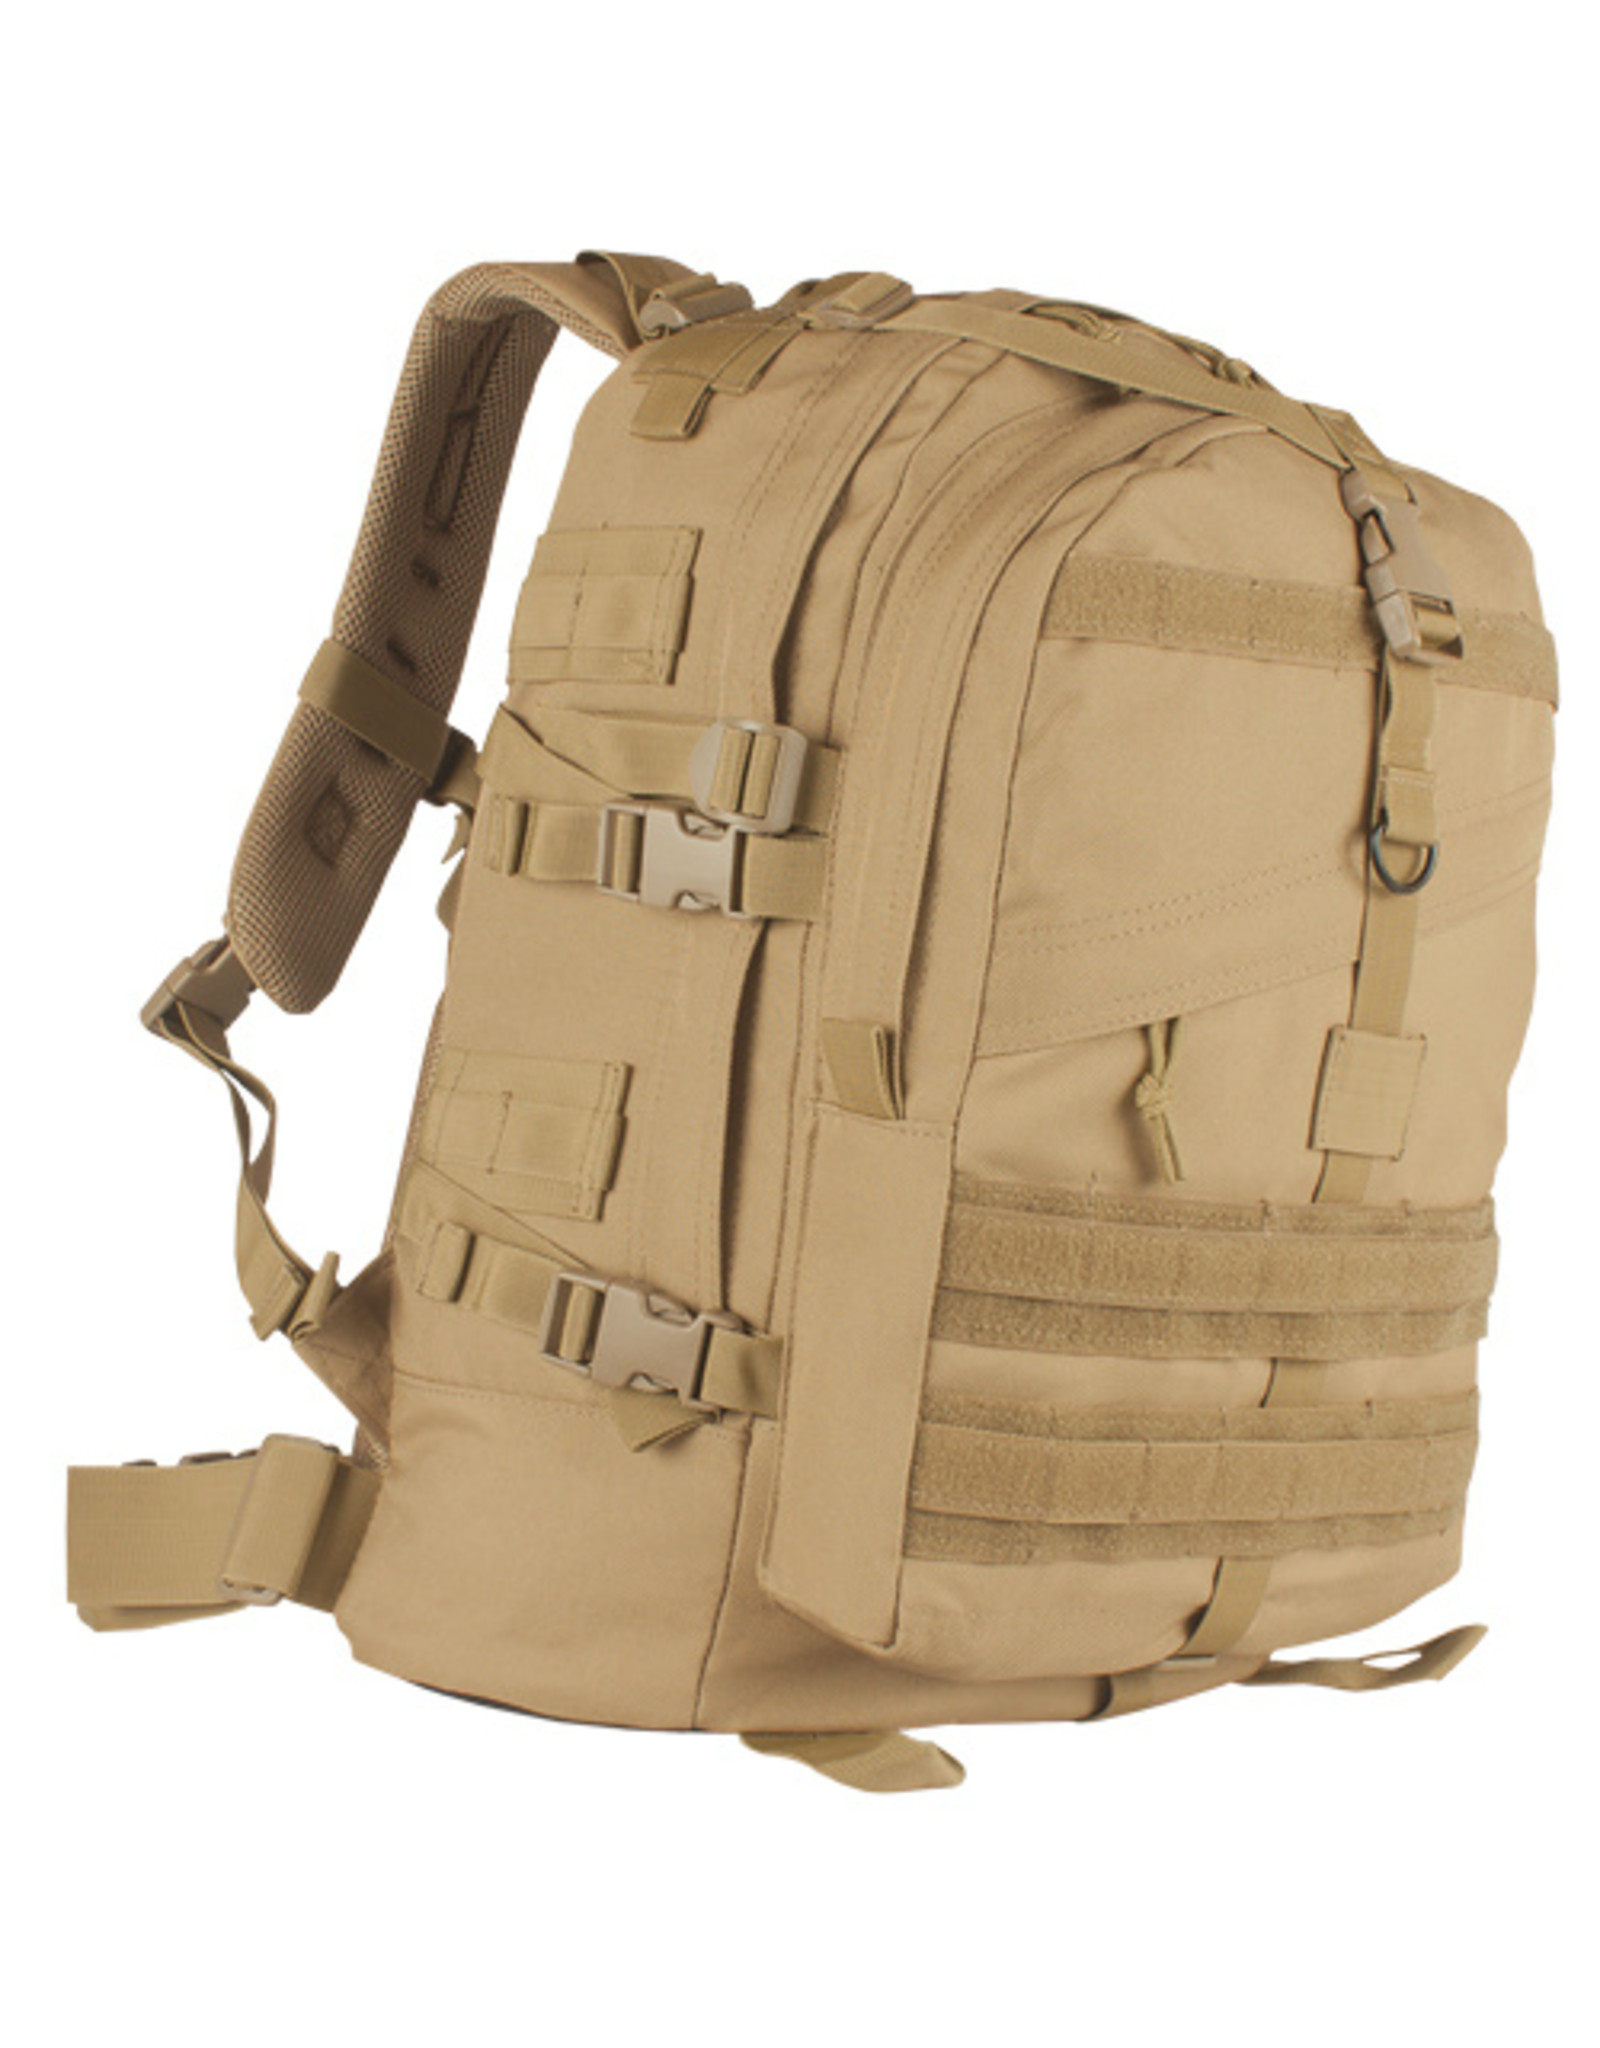 FOX TACTICAL GEAR LARGE TRANSPORT PACK